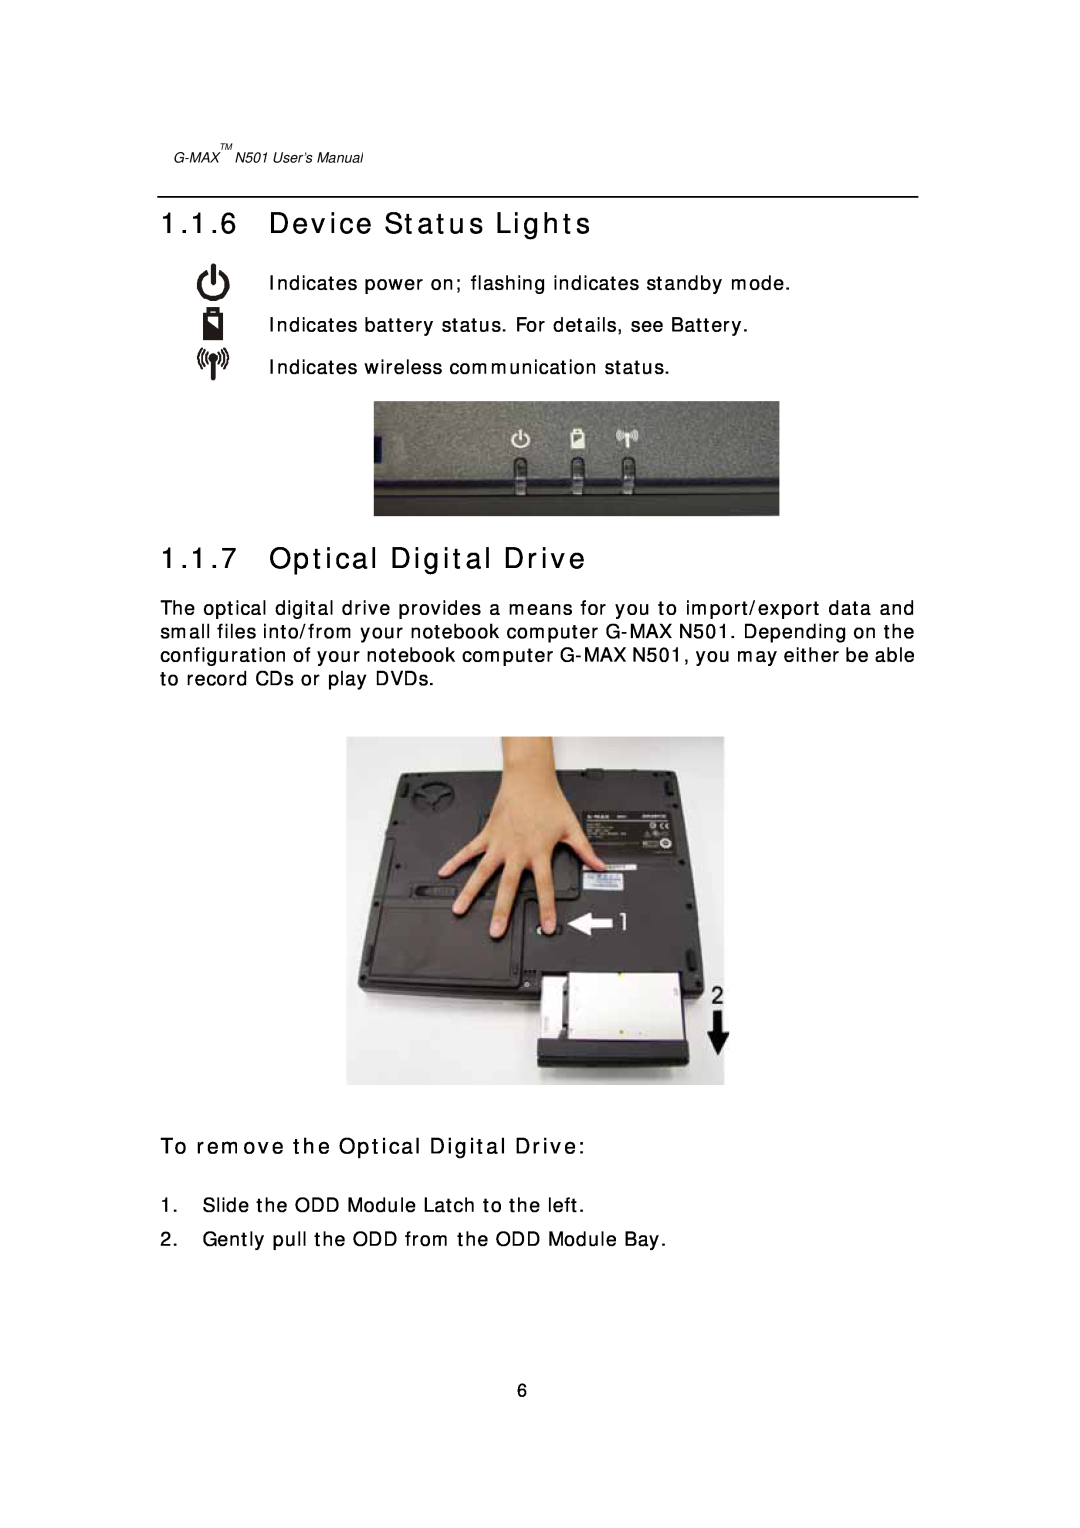 Gigabyte G-MAX N501 user manual Device Status Lights, To remove the Optical Digital Drive 